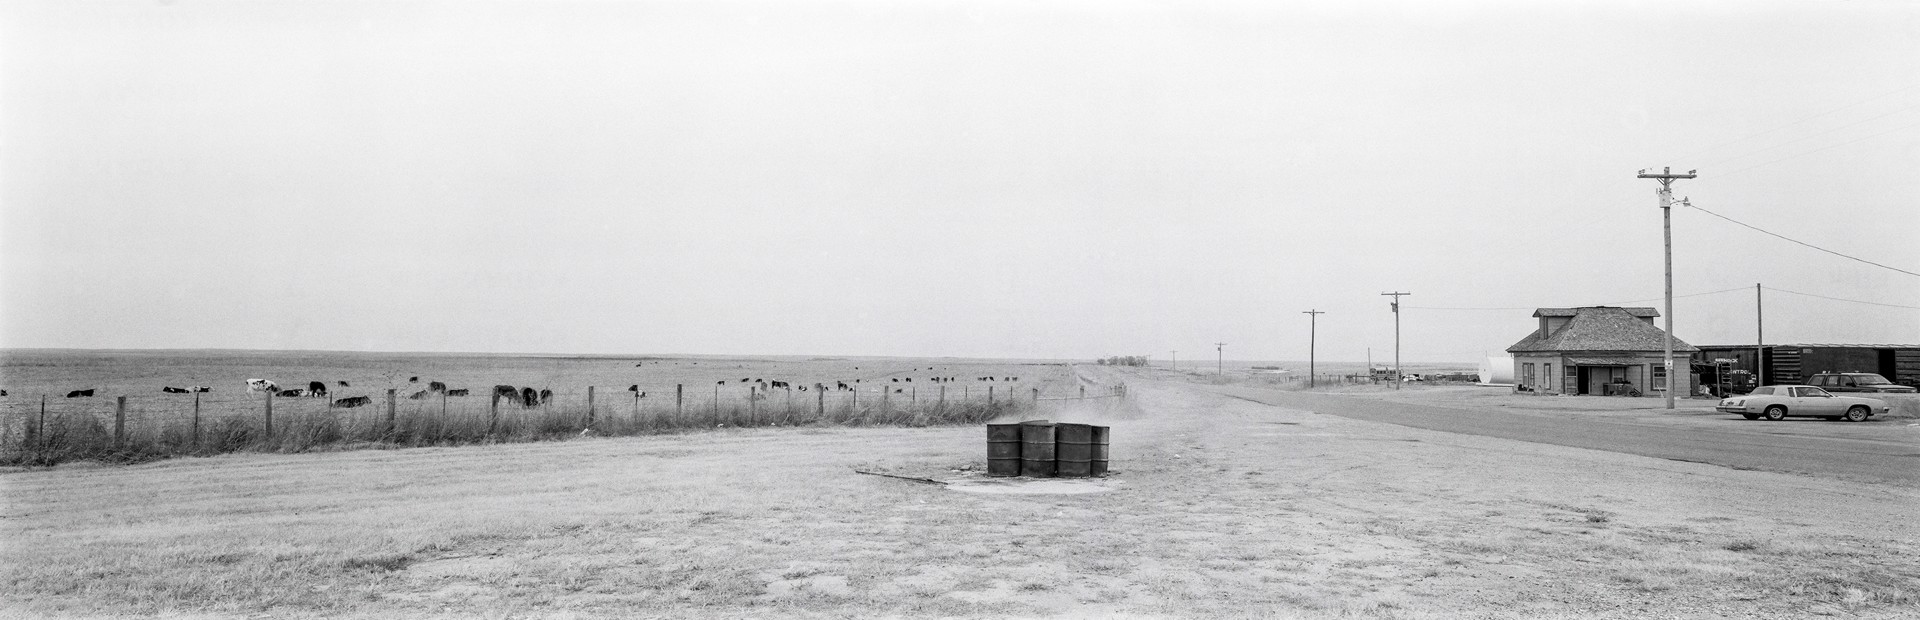 Cows in Field/ Burning Barrels, Kansas by Lawrence McFarland